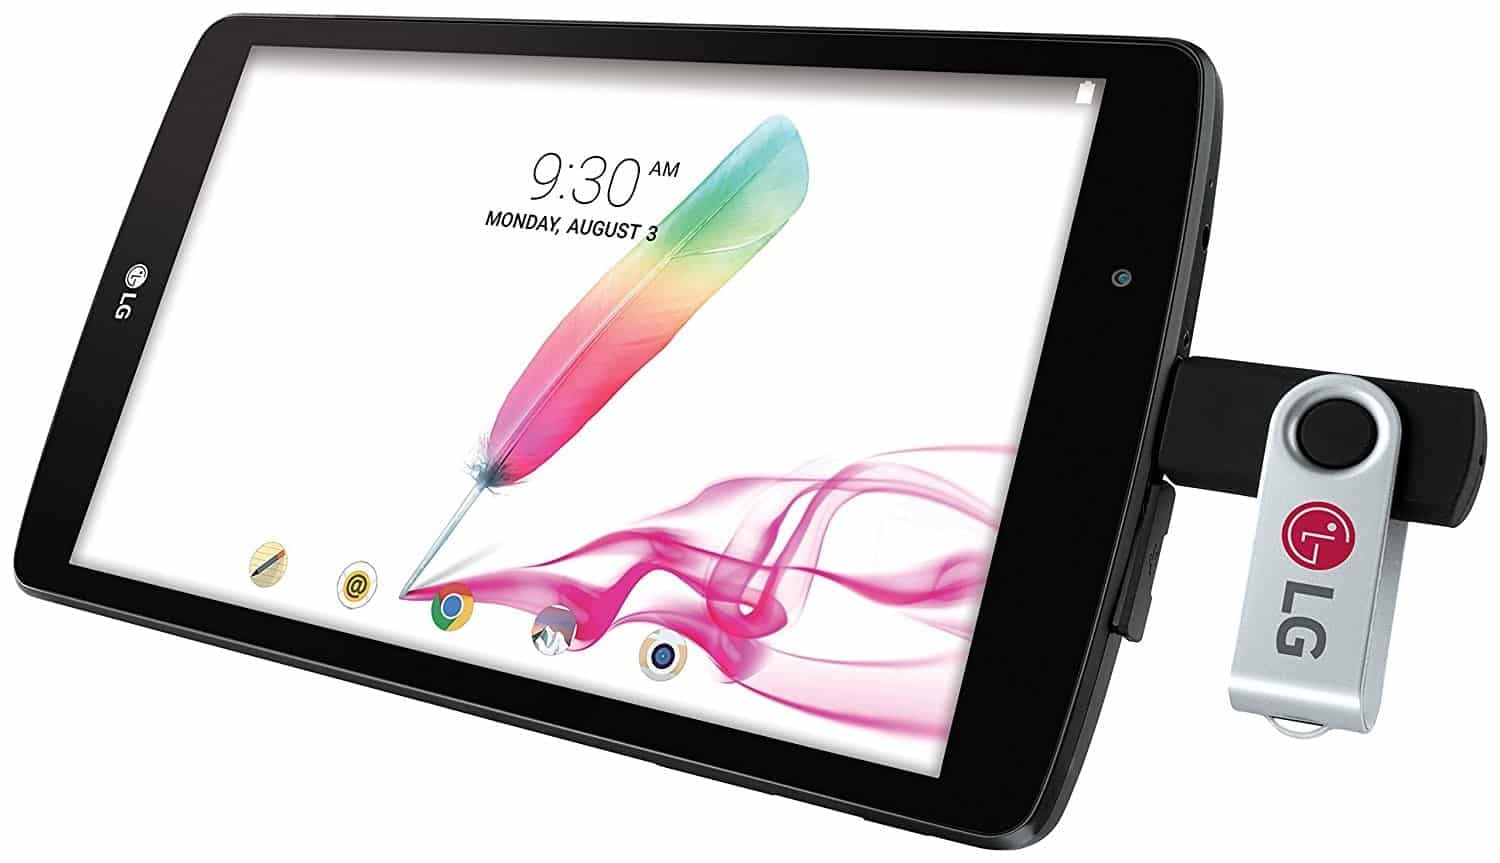 Top 7 Tablets With USB Port You Can Buy in 2022